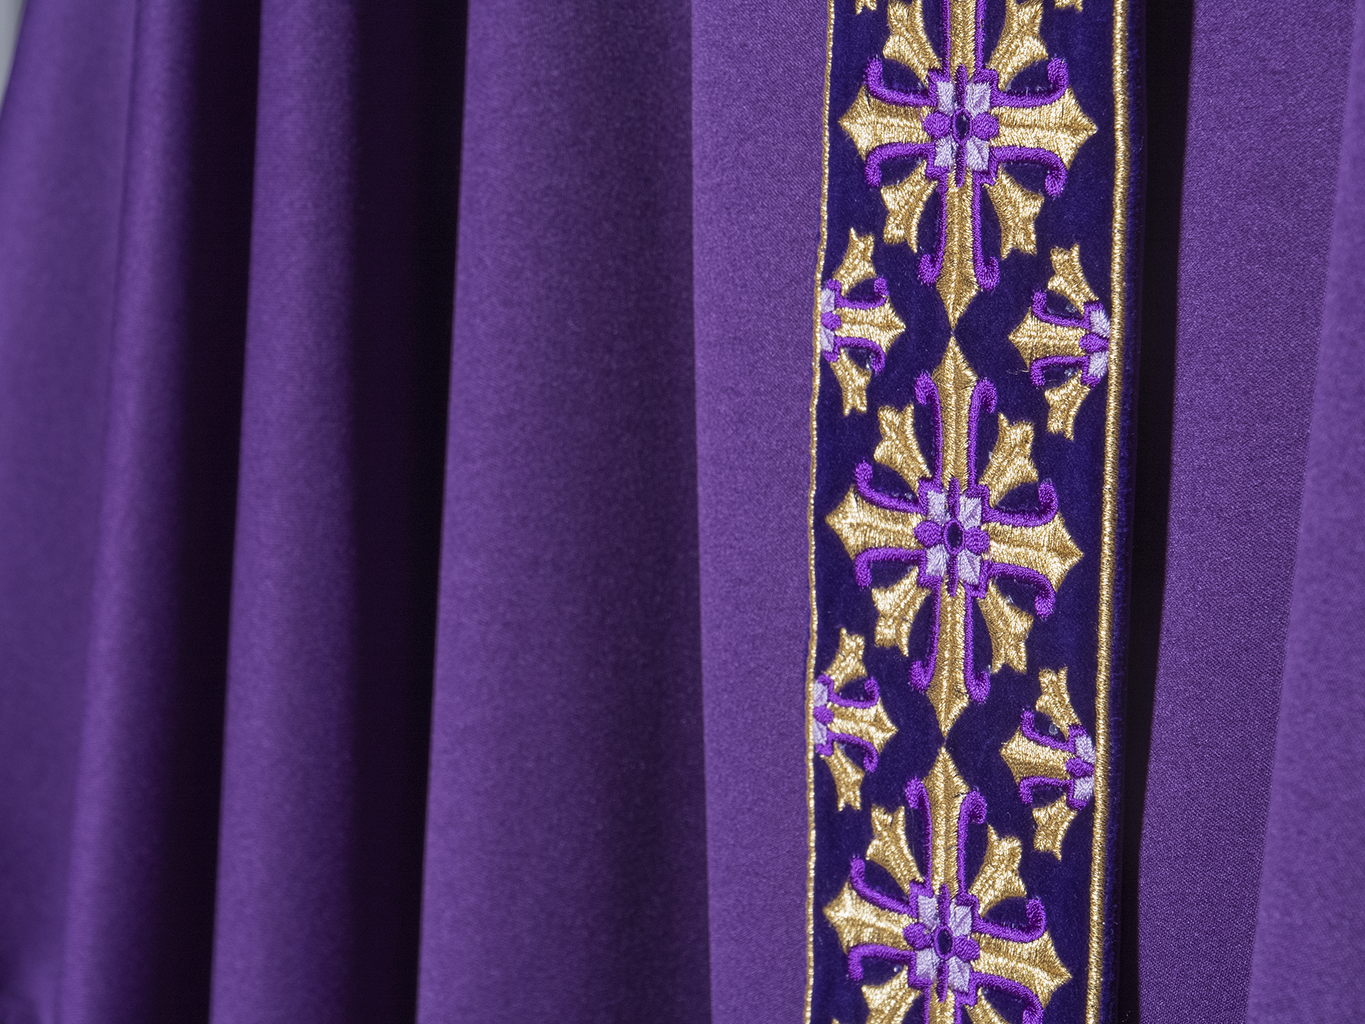 Chasuble with decorative embroidery in purple